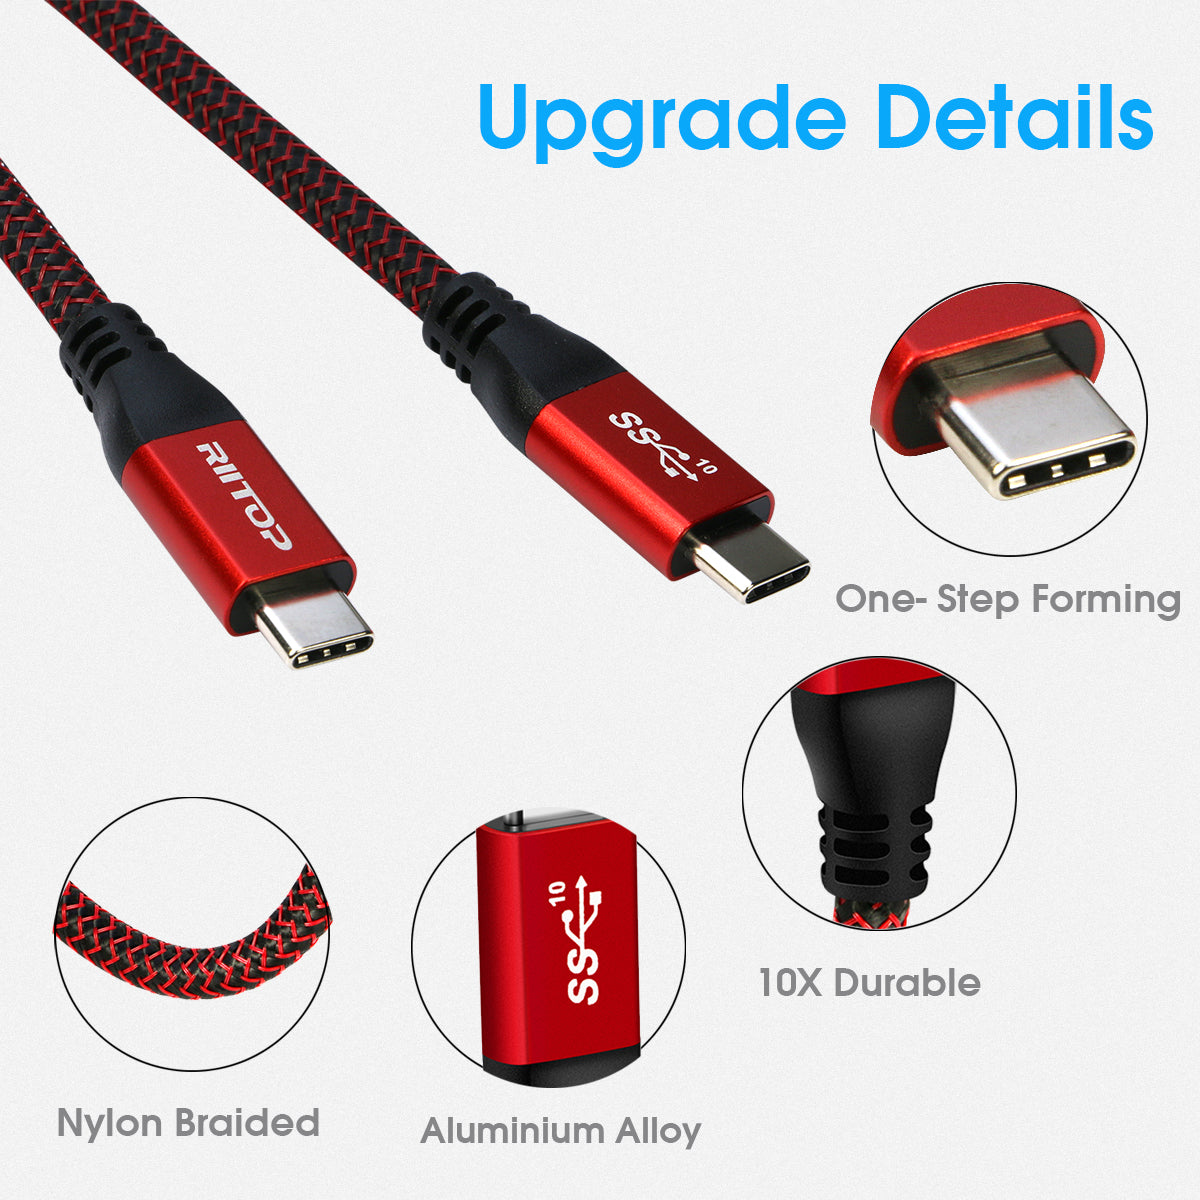 USB C to Cable (5FT), RIITOP USB 3.1 Type-C Fast Charging